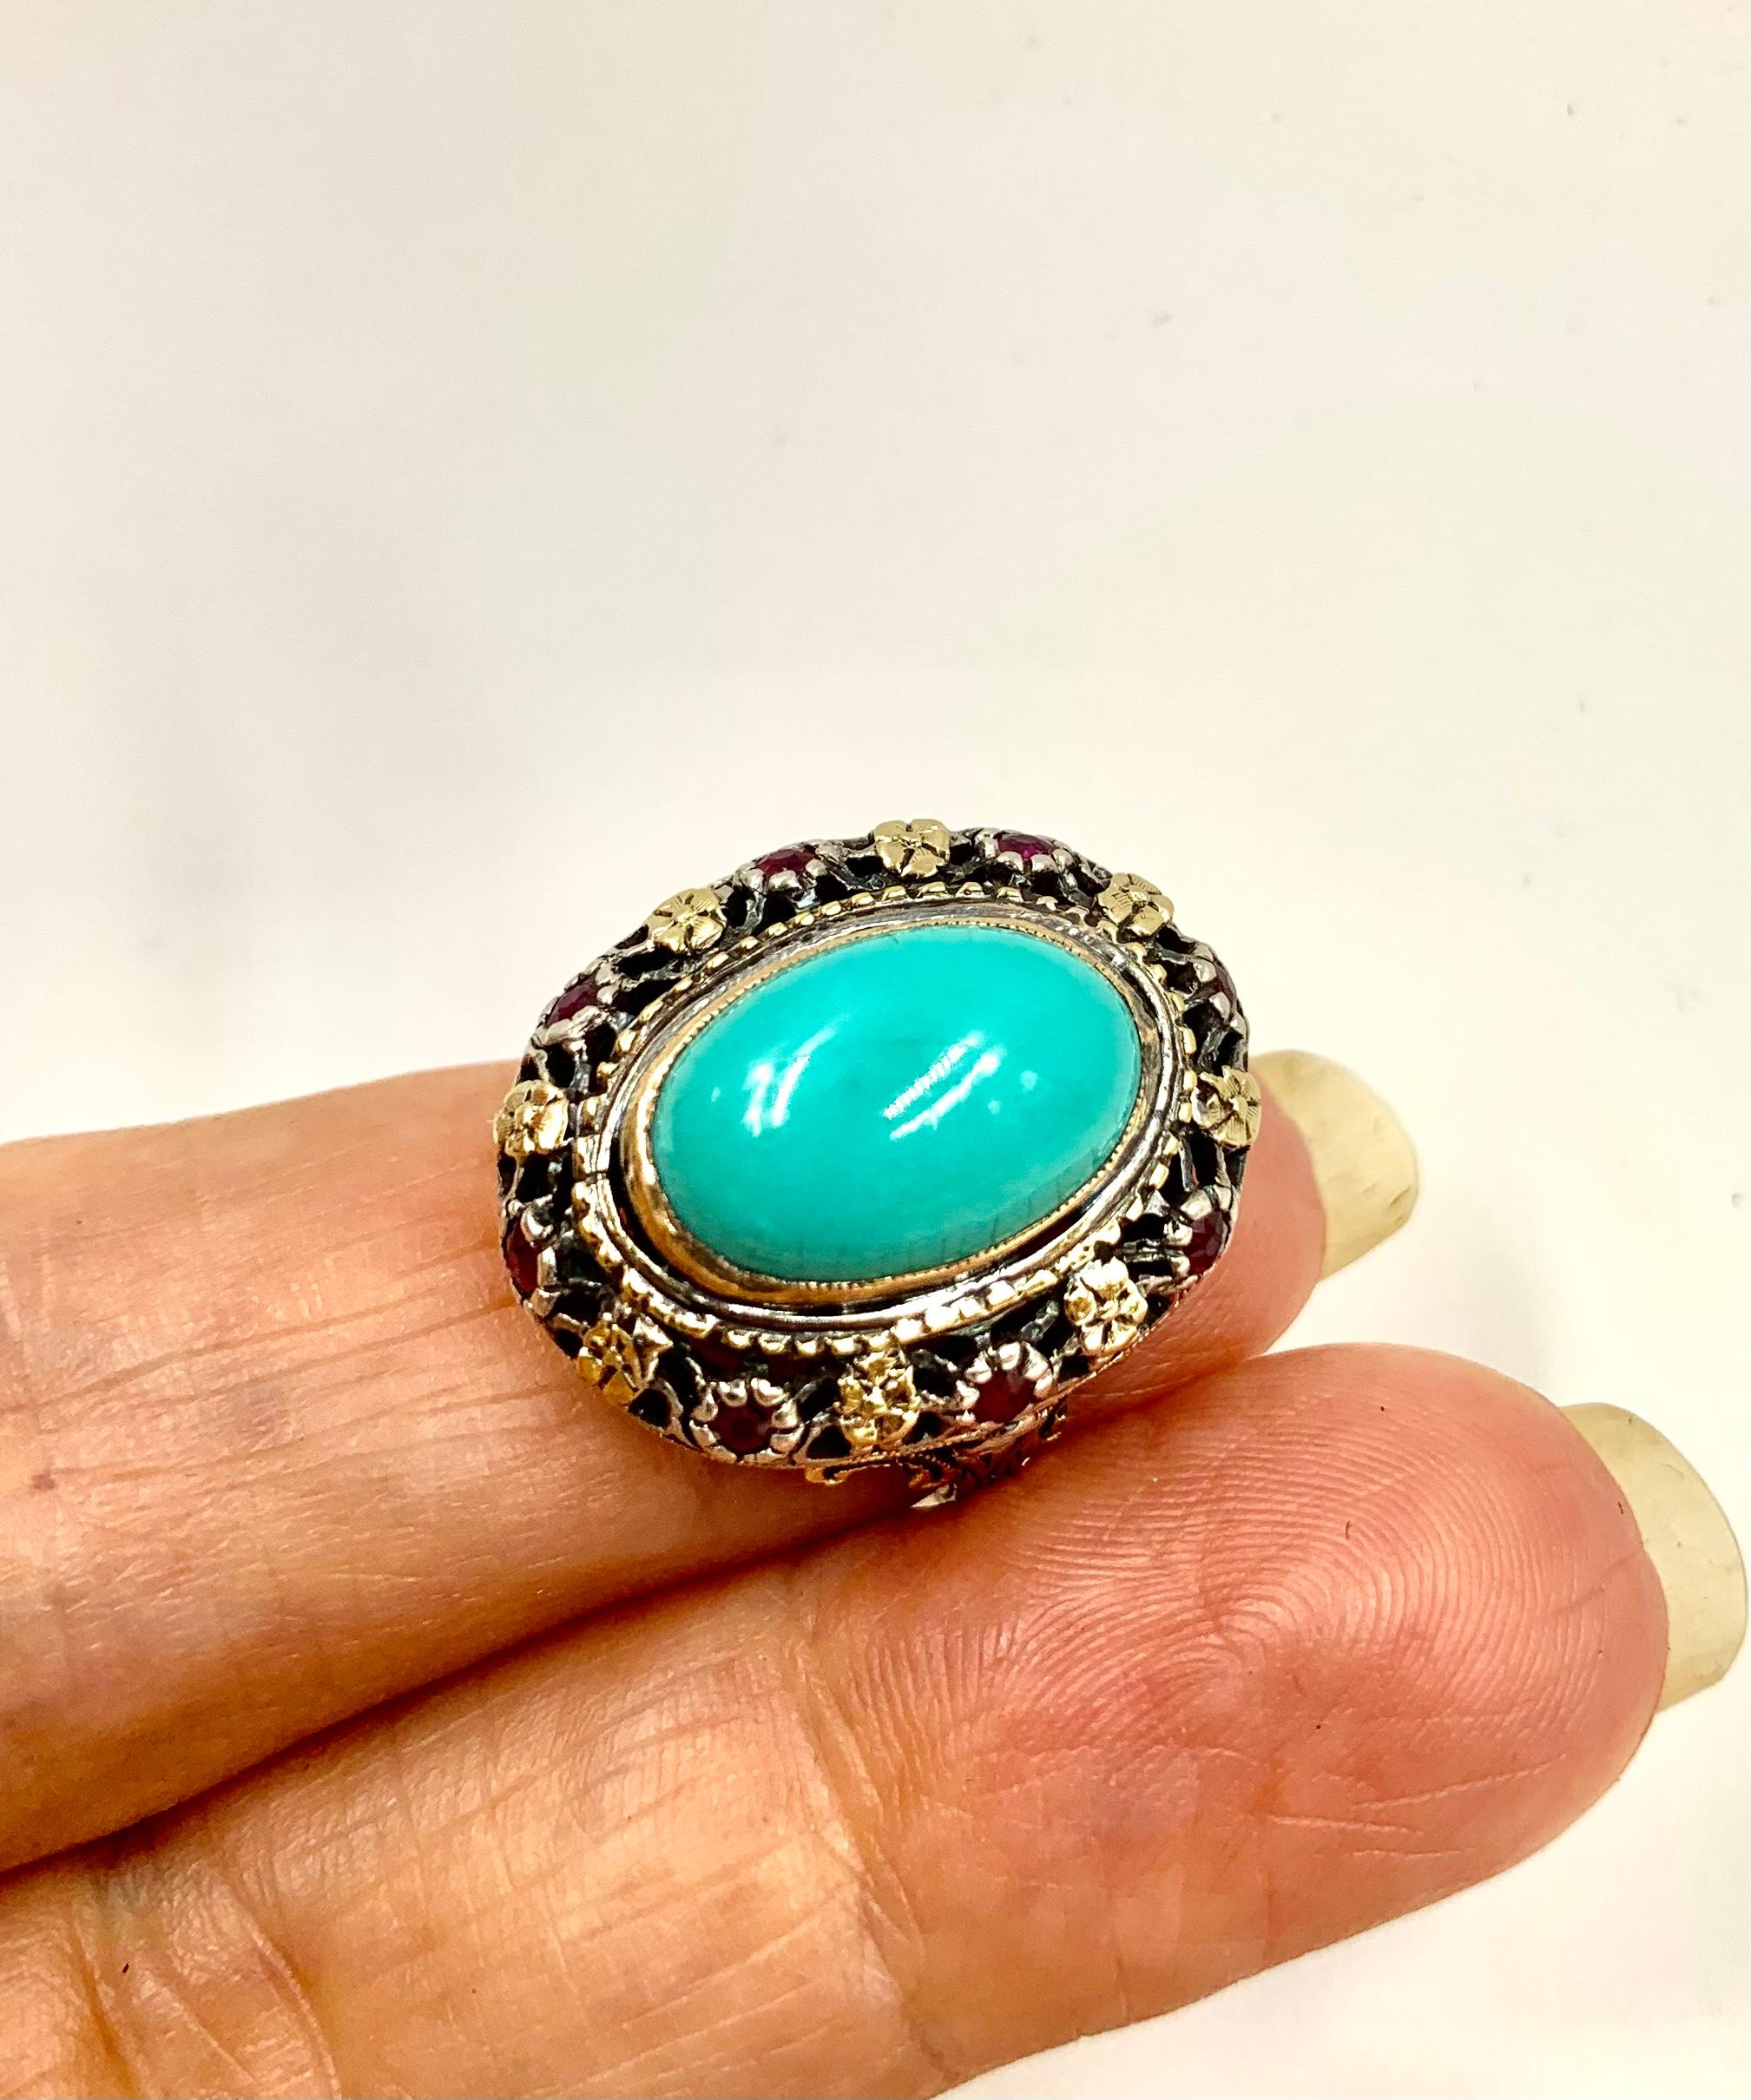 Antique Renaissance Style Turquoise, Ruby 18K Filigree Gold Ring, 19th Century For Sale 2